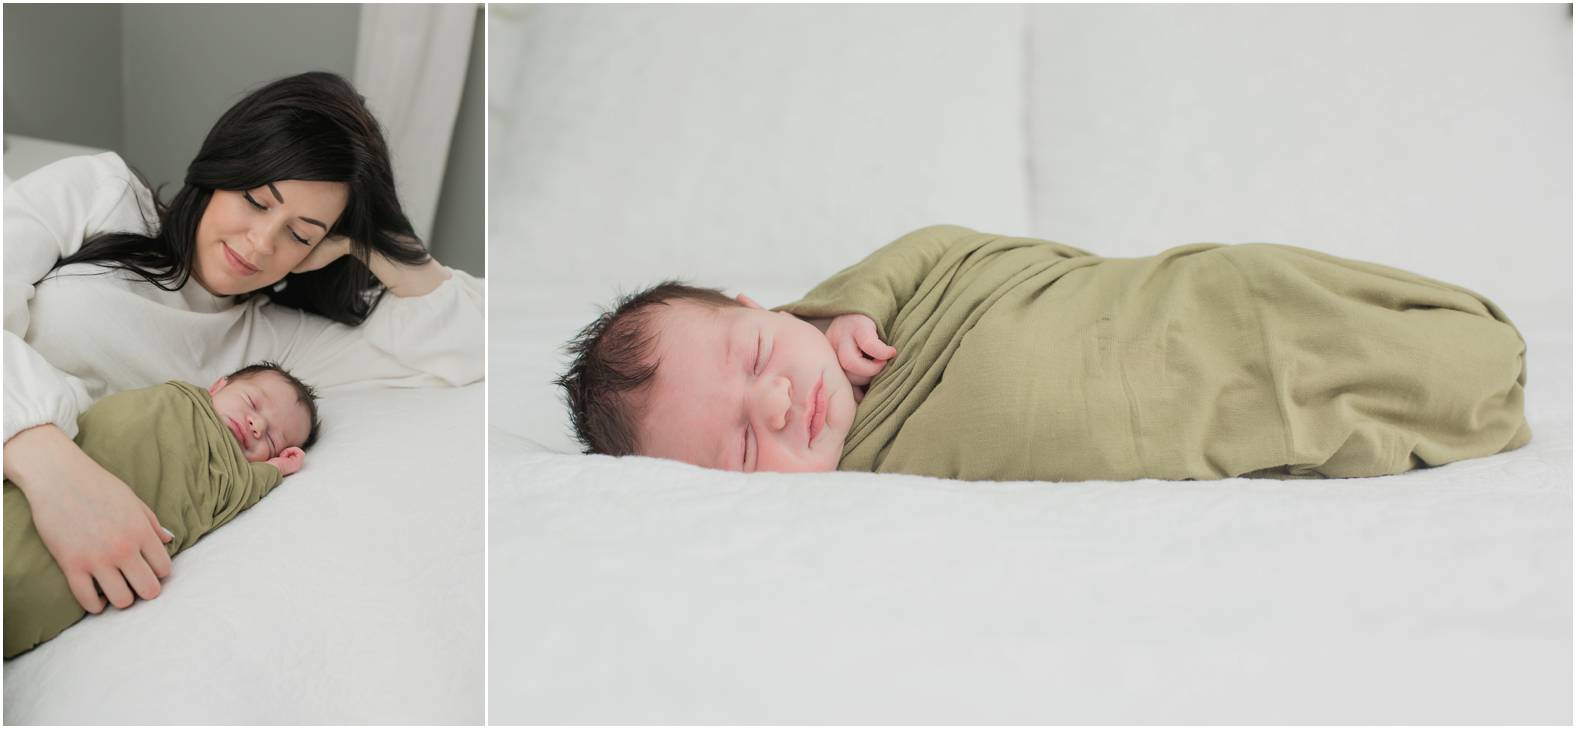 Newborn baby boy swaddled in olive green blanket on bed.